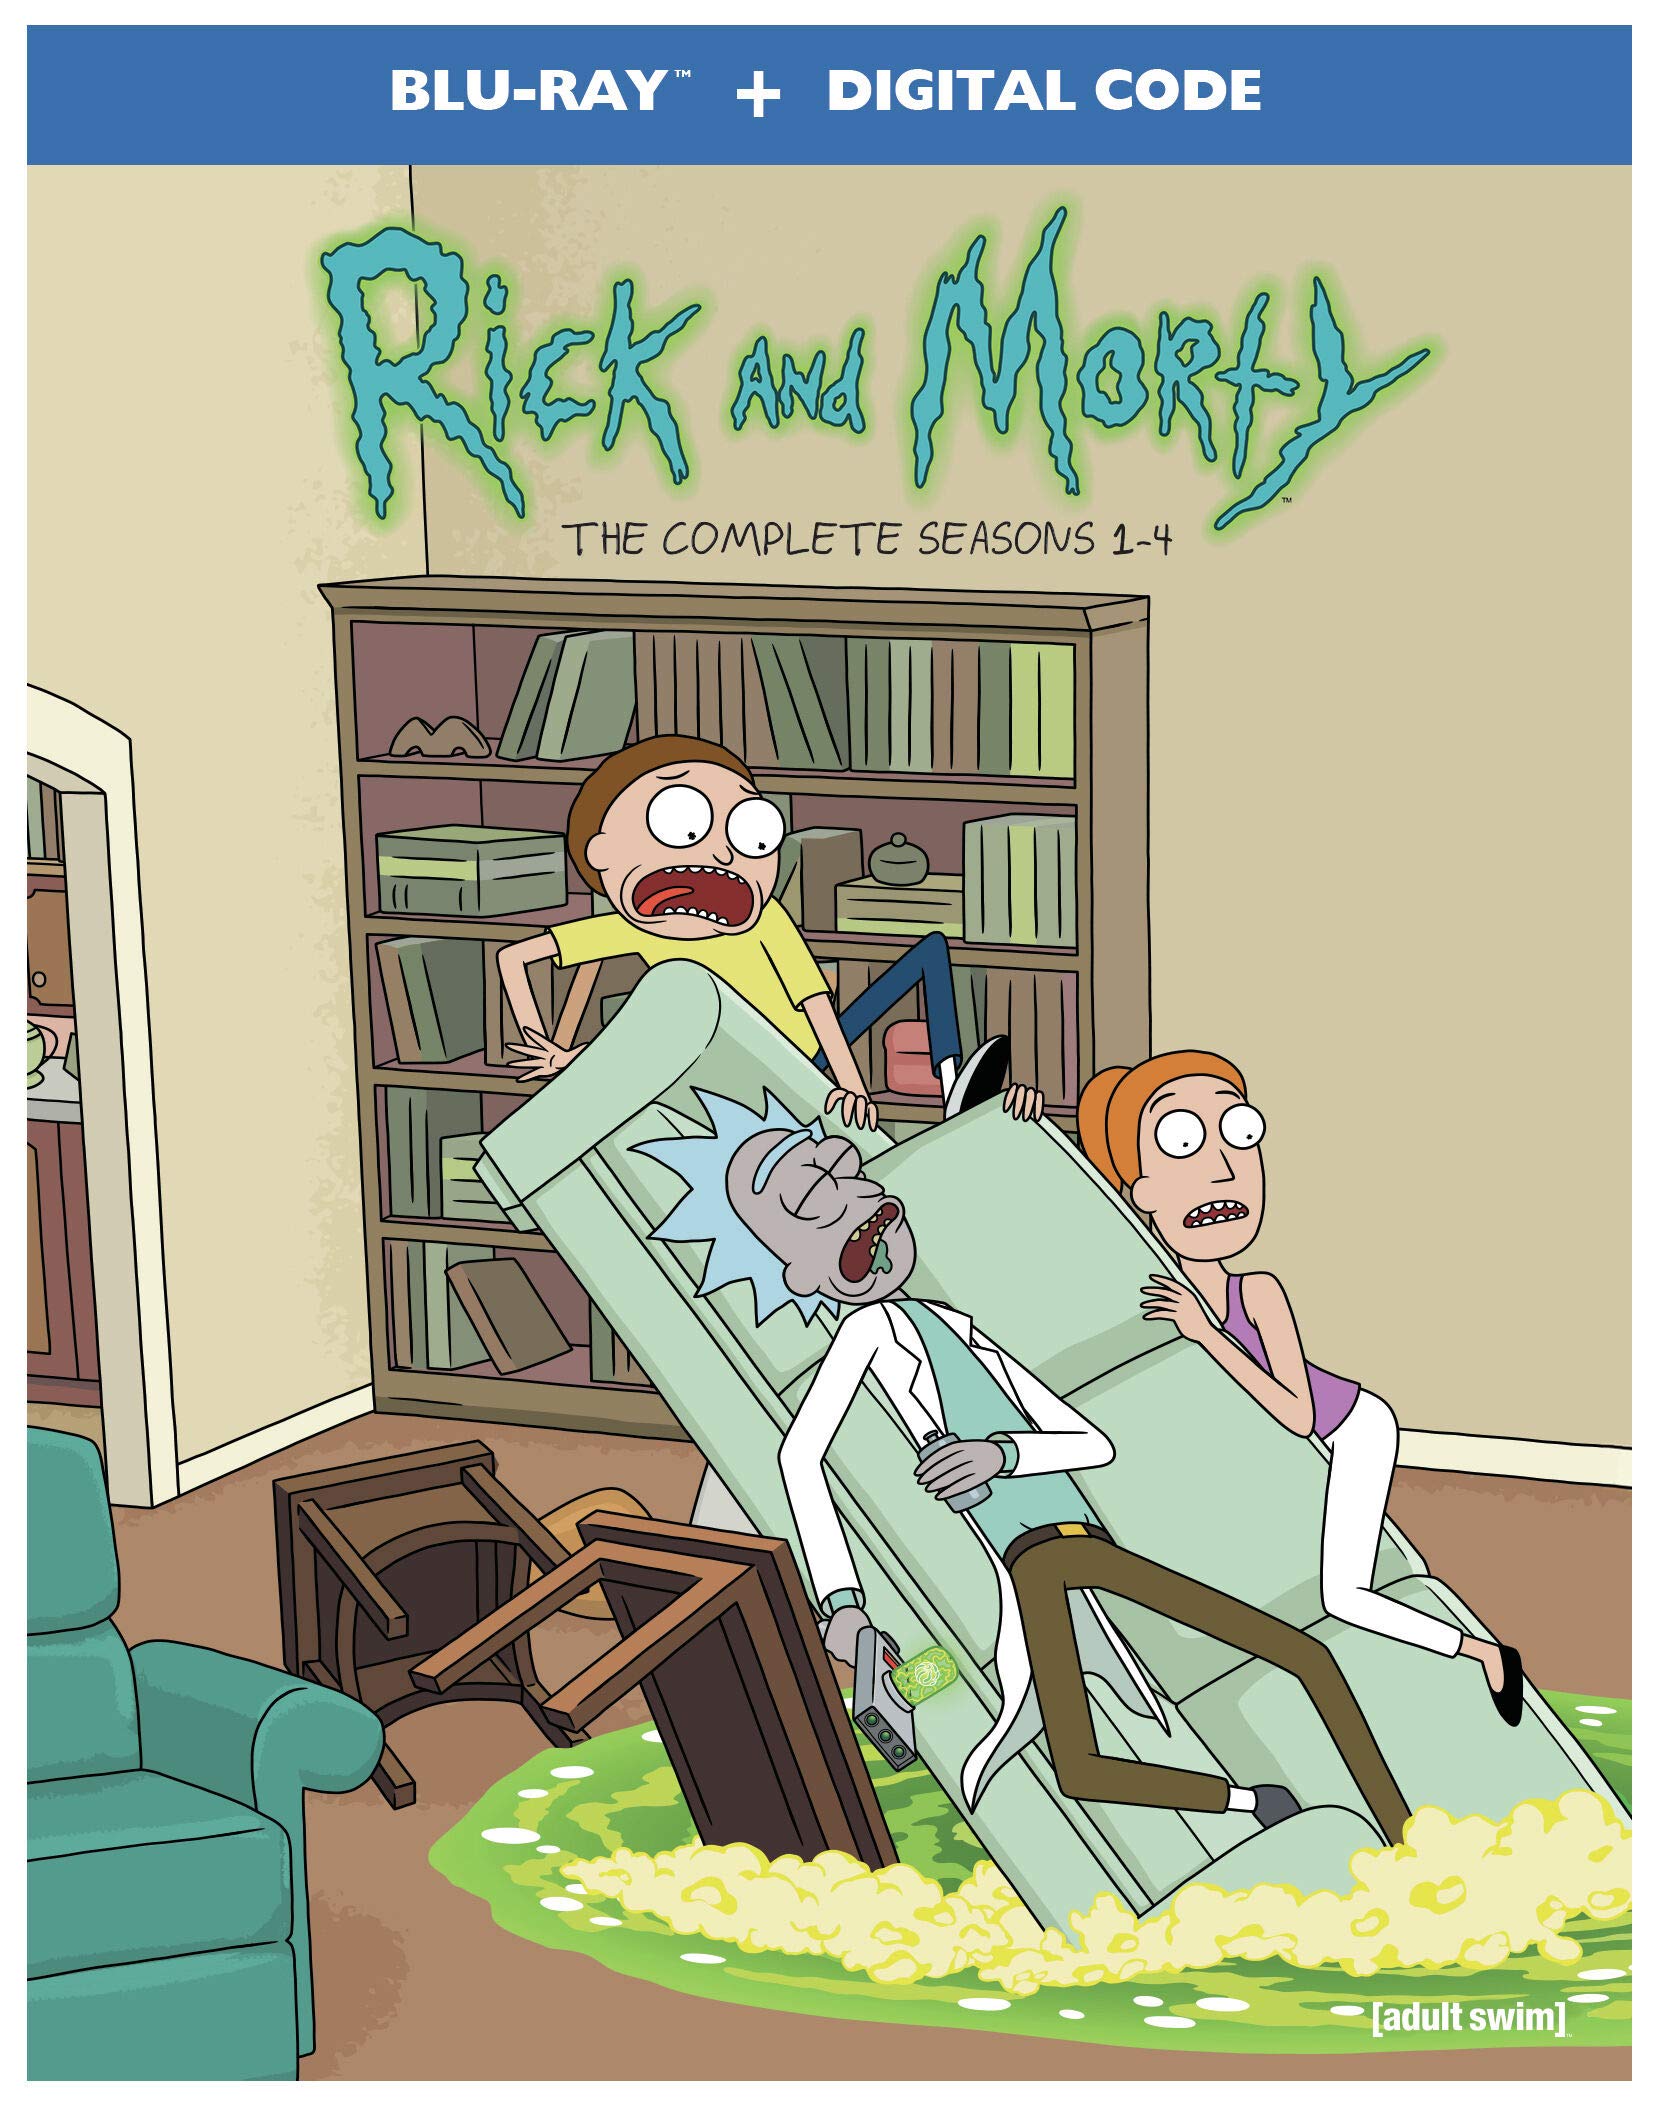 Rick and Morty: Seasons 1-4 (Blu-ray) $27.82 + Free Shipping w/ Prime or on $35+